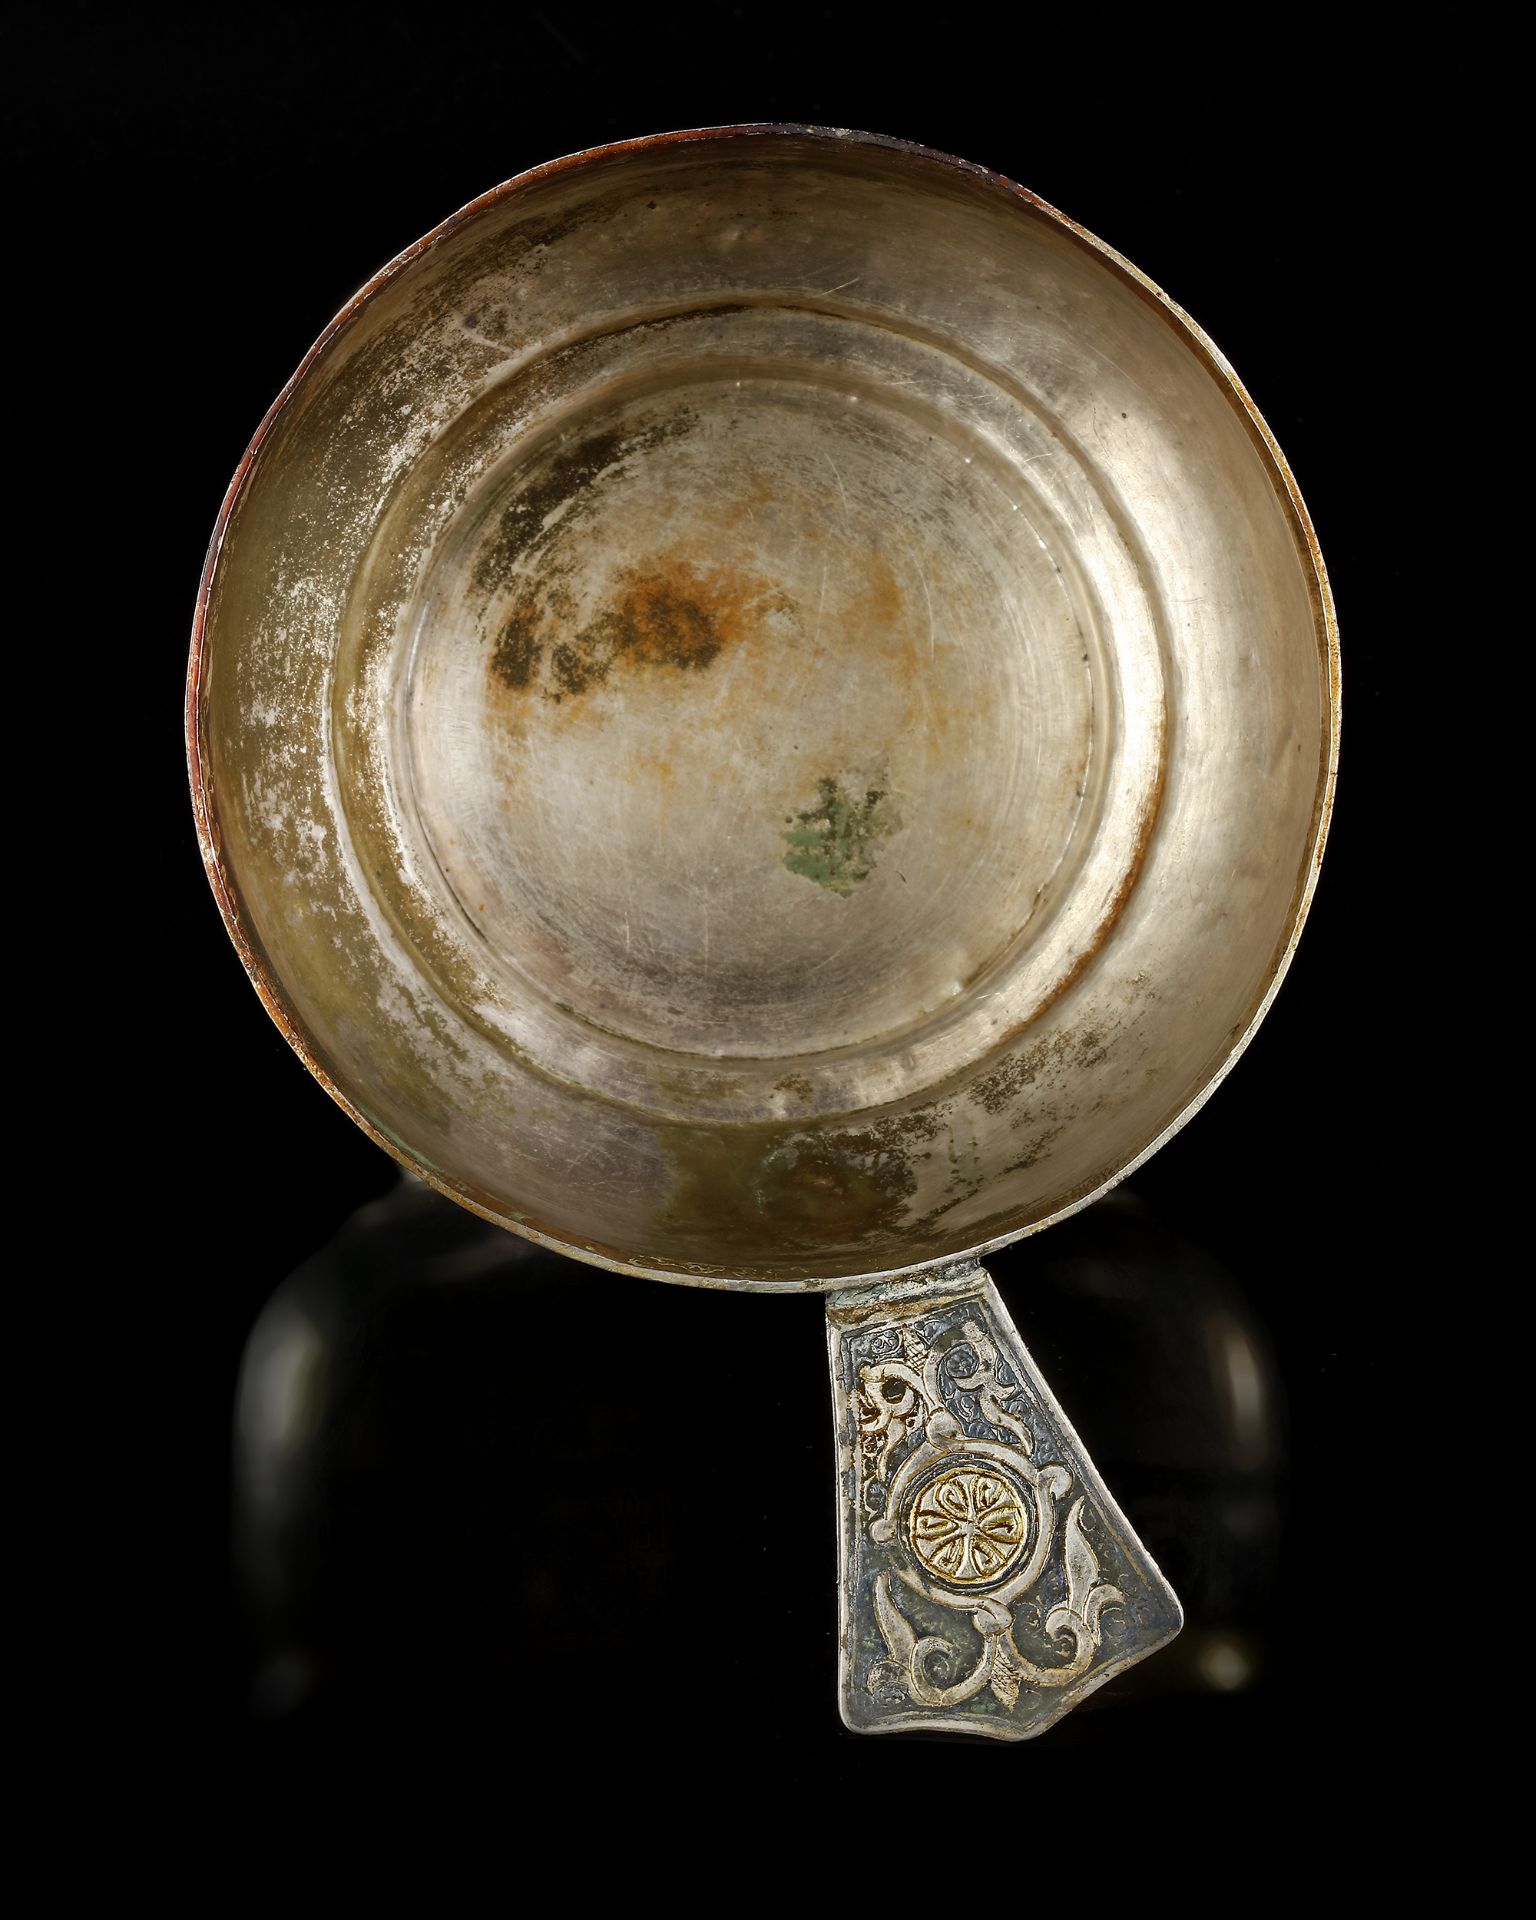 A RARE SILVER AND NIELLOED CUP WITH KUFIC INSCRIPTION, PERSIA OR CENTRAL ASIA, 11TH-12TH CENTURY - Image 20 of 34